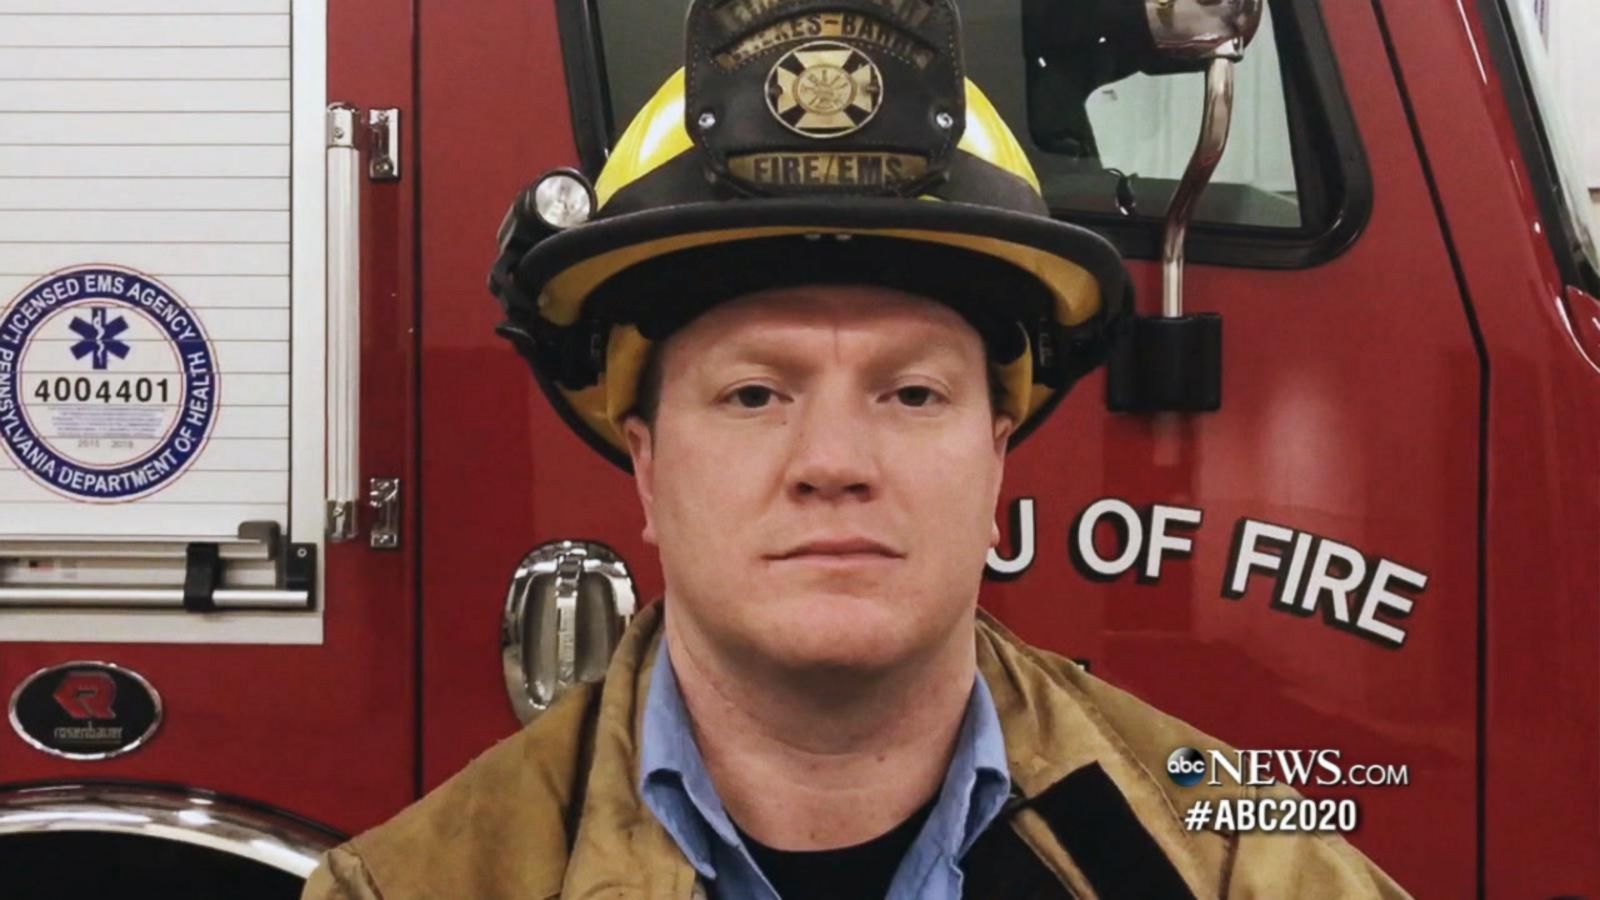 Pennsylvania Firefighter Works Three Jobs to Support His Family: Part 1